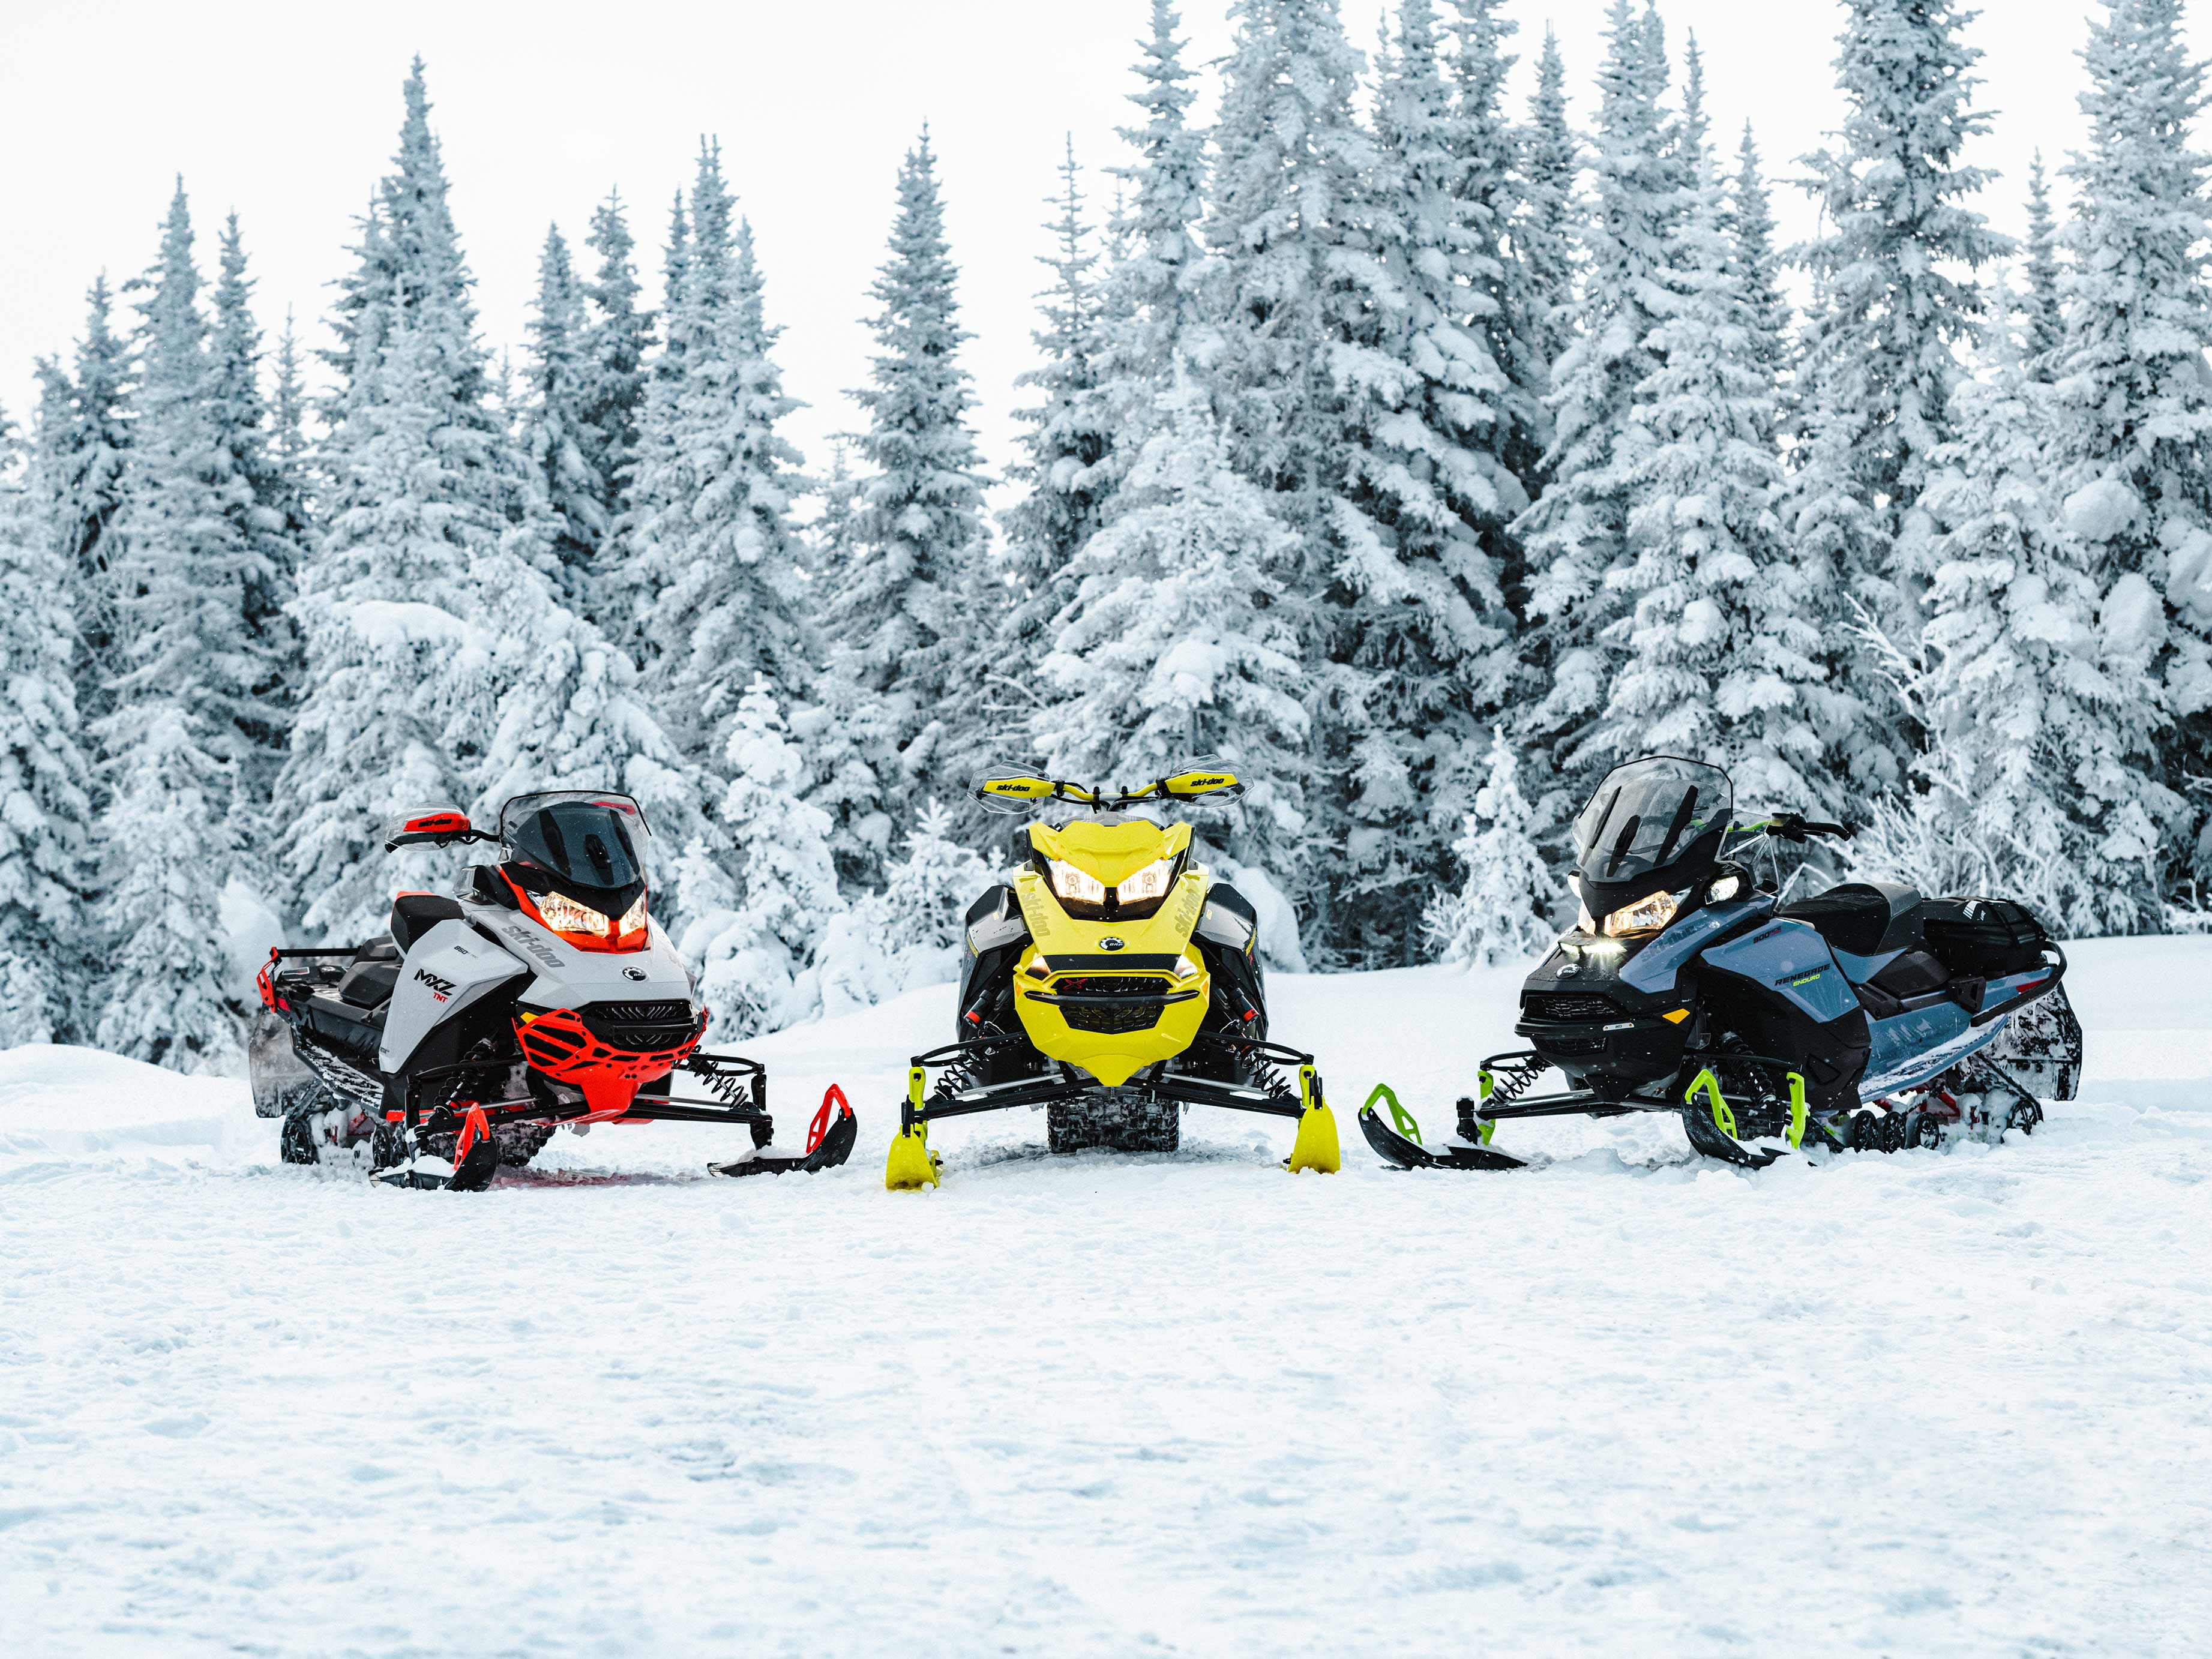 3 snowmobiles next to a forest with snow